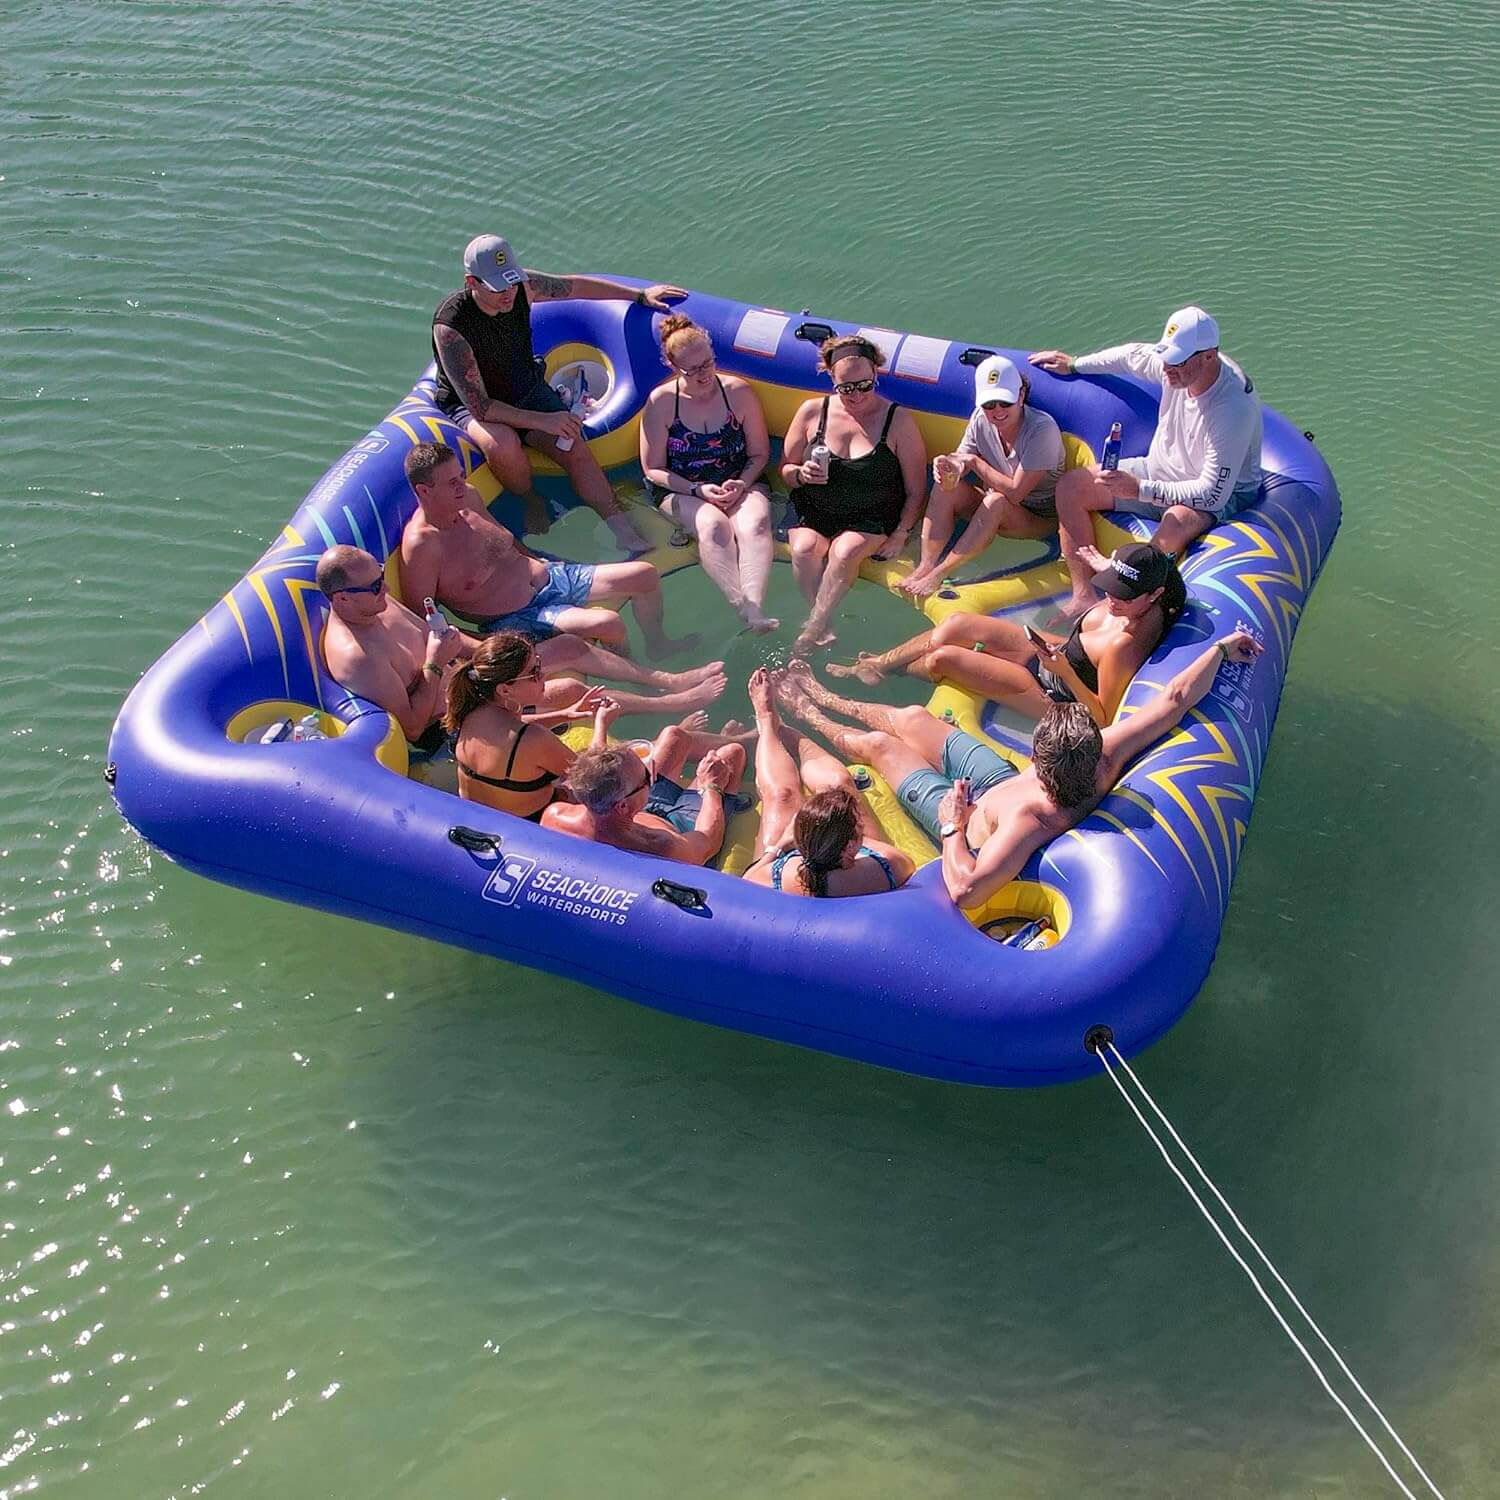 12 people hanging out on a party float made by seachoice